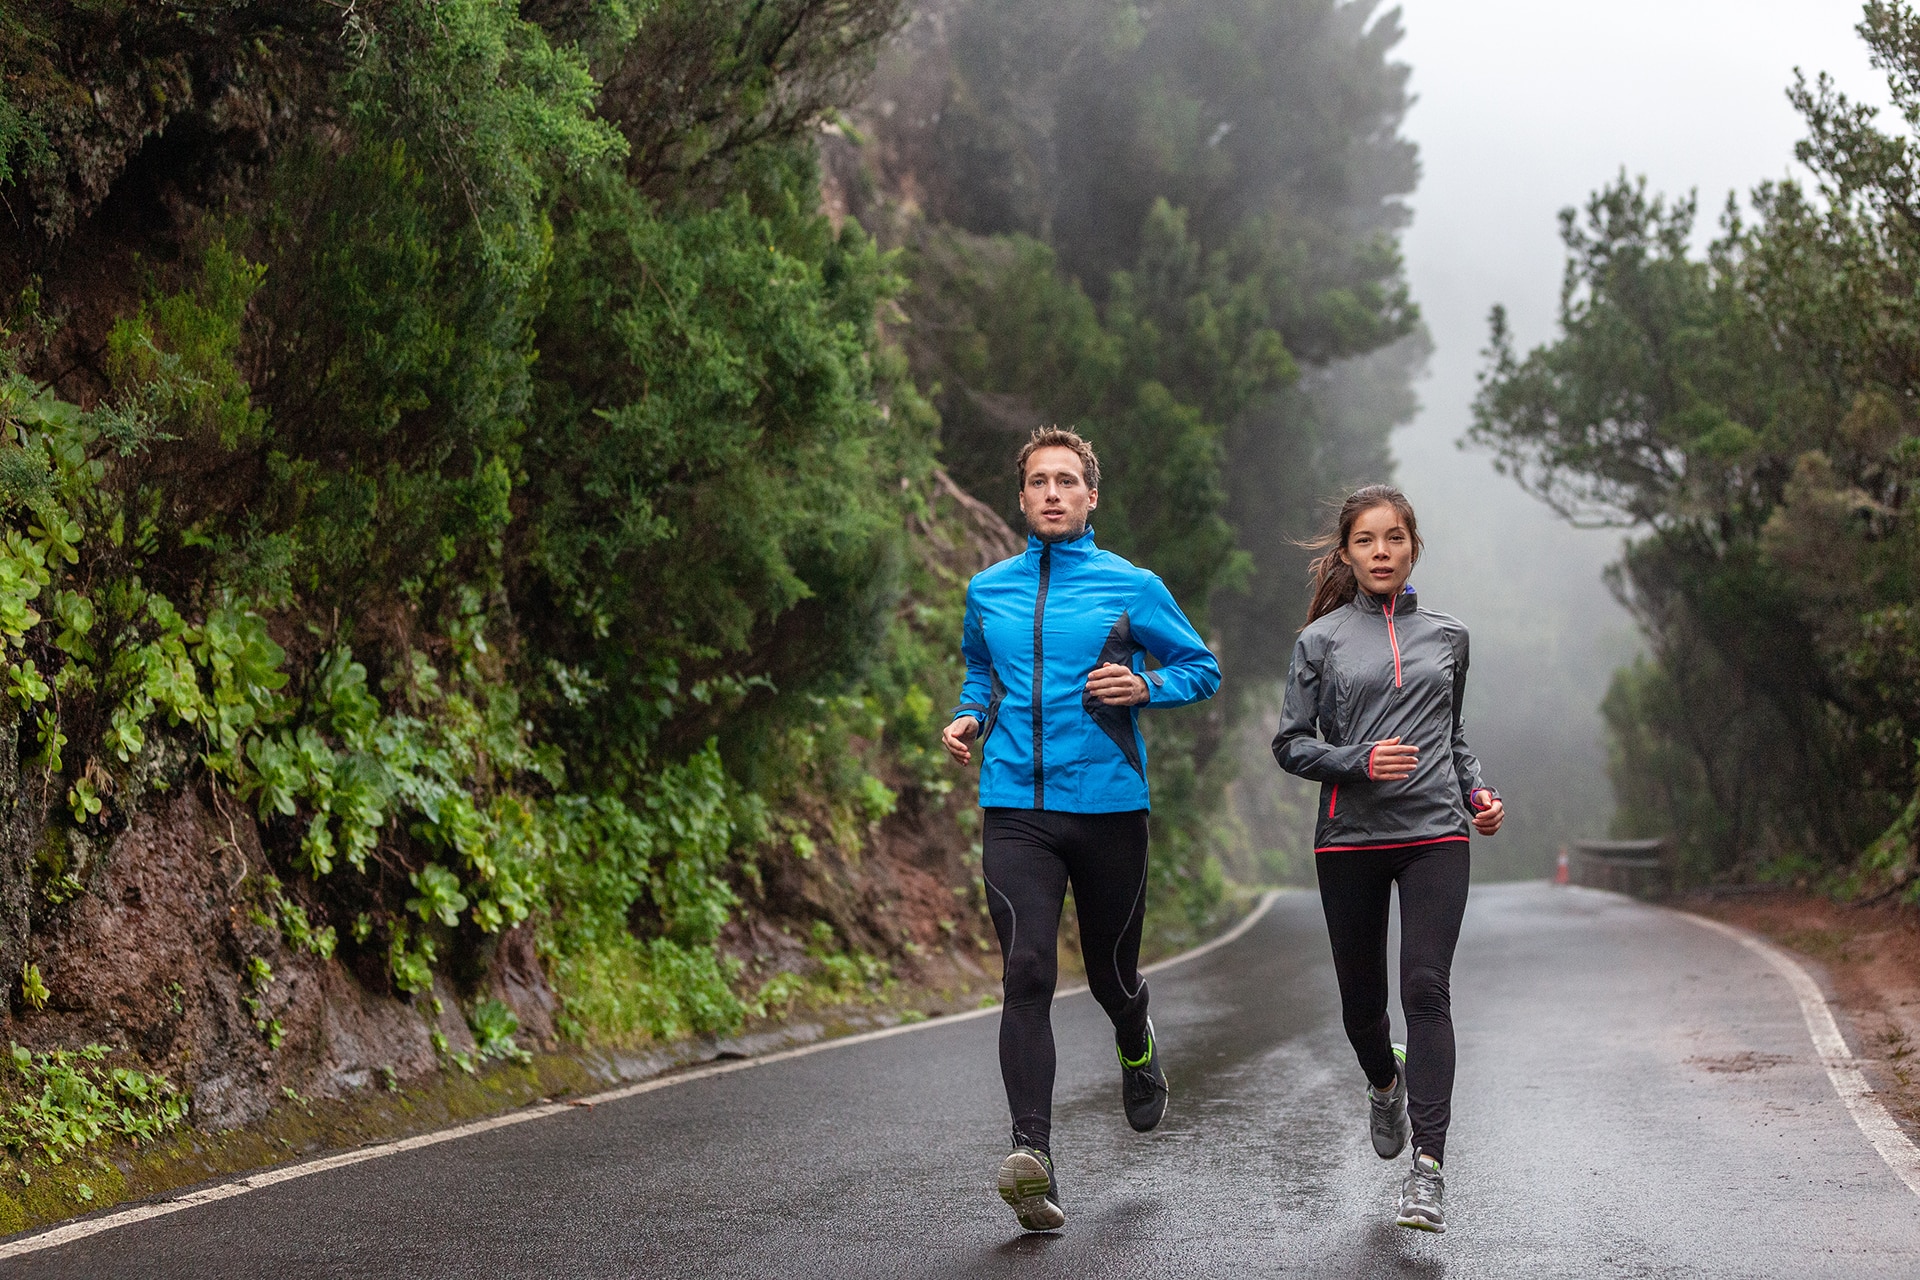 Rain run fit people training jogging in rain weather wearing cold clothing running outdoors in nature autumn season. Active couple on wet park trail jogging. Asian woman, Caucasian man athletes.; Shutterstock ID 1649306830; purchase_order: -; job: -; client: -; other: -